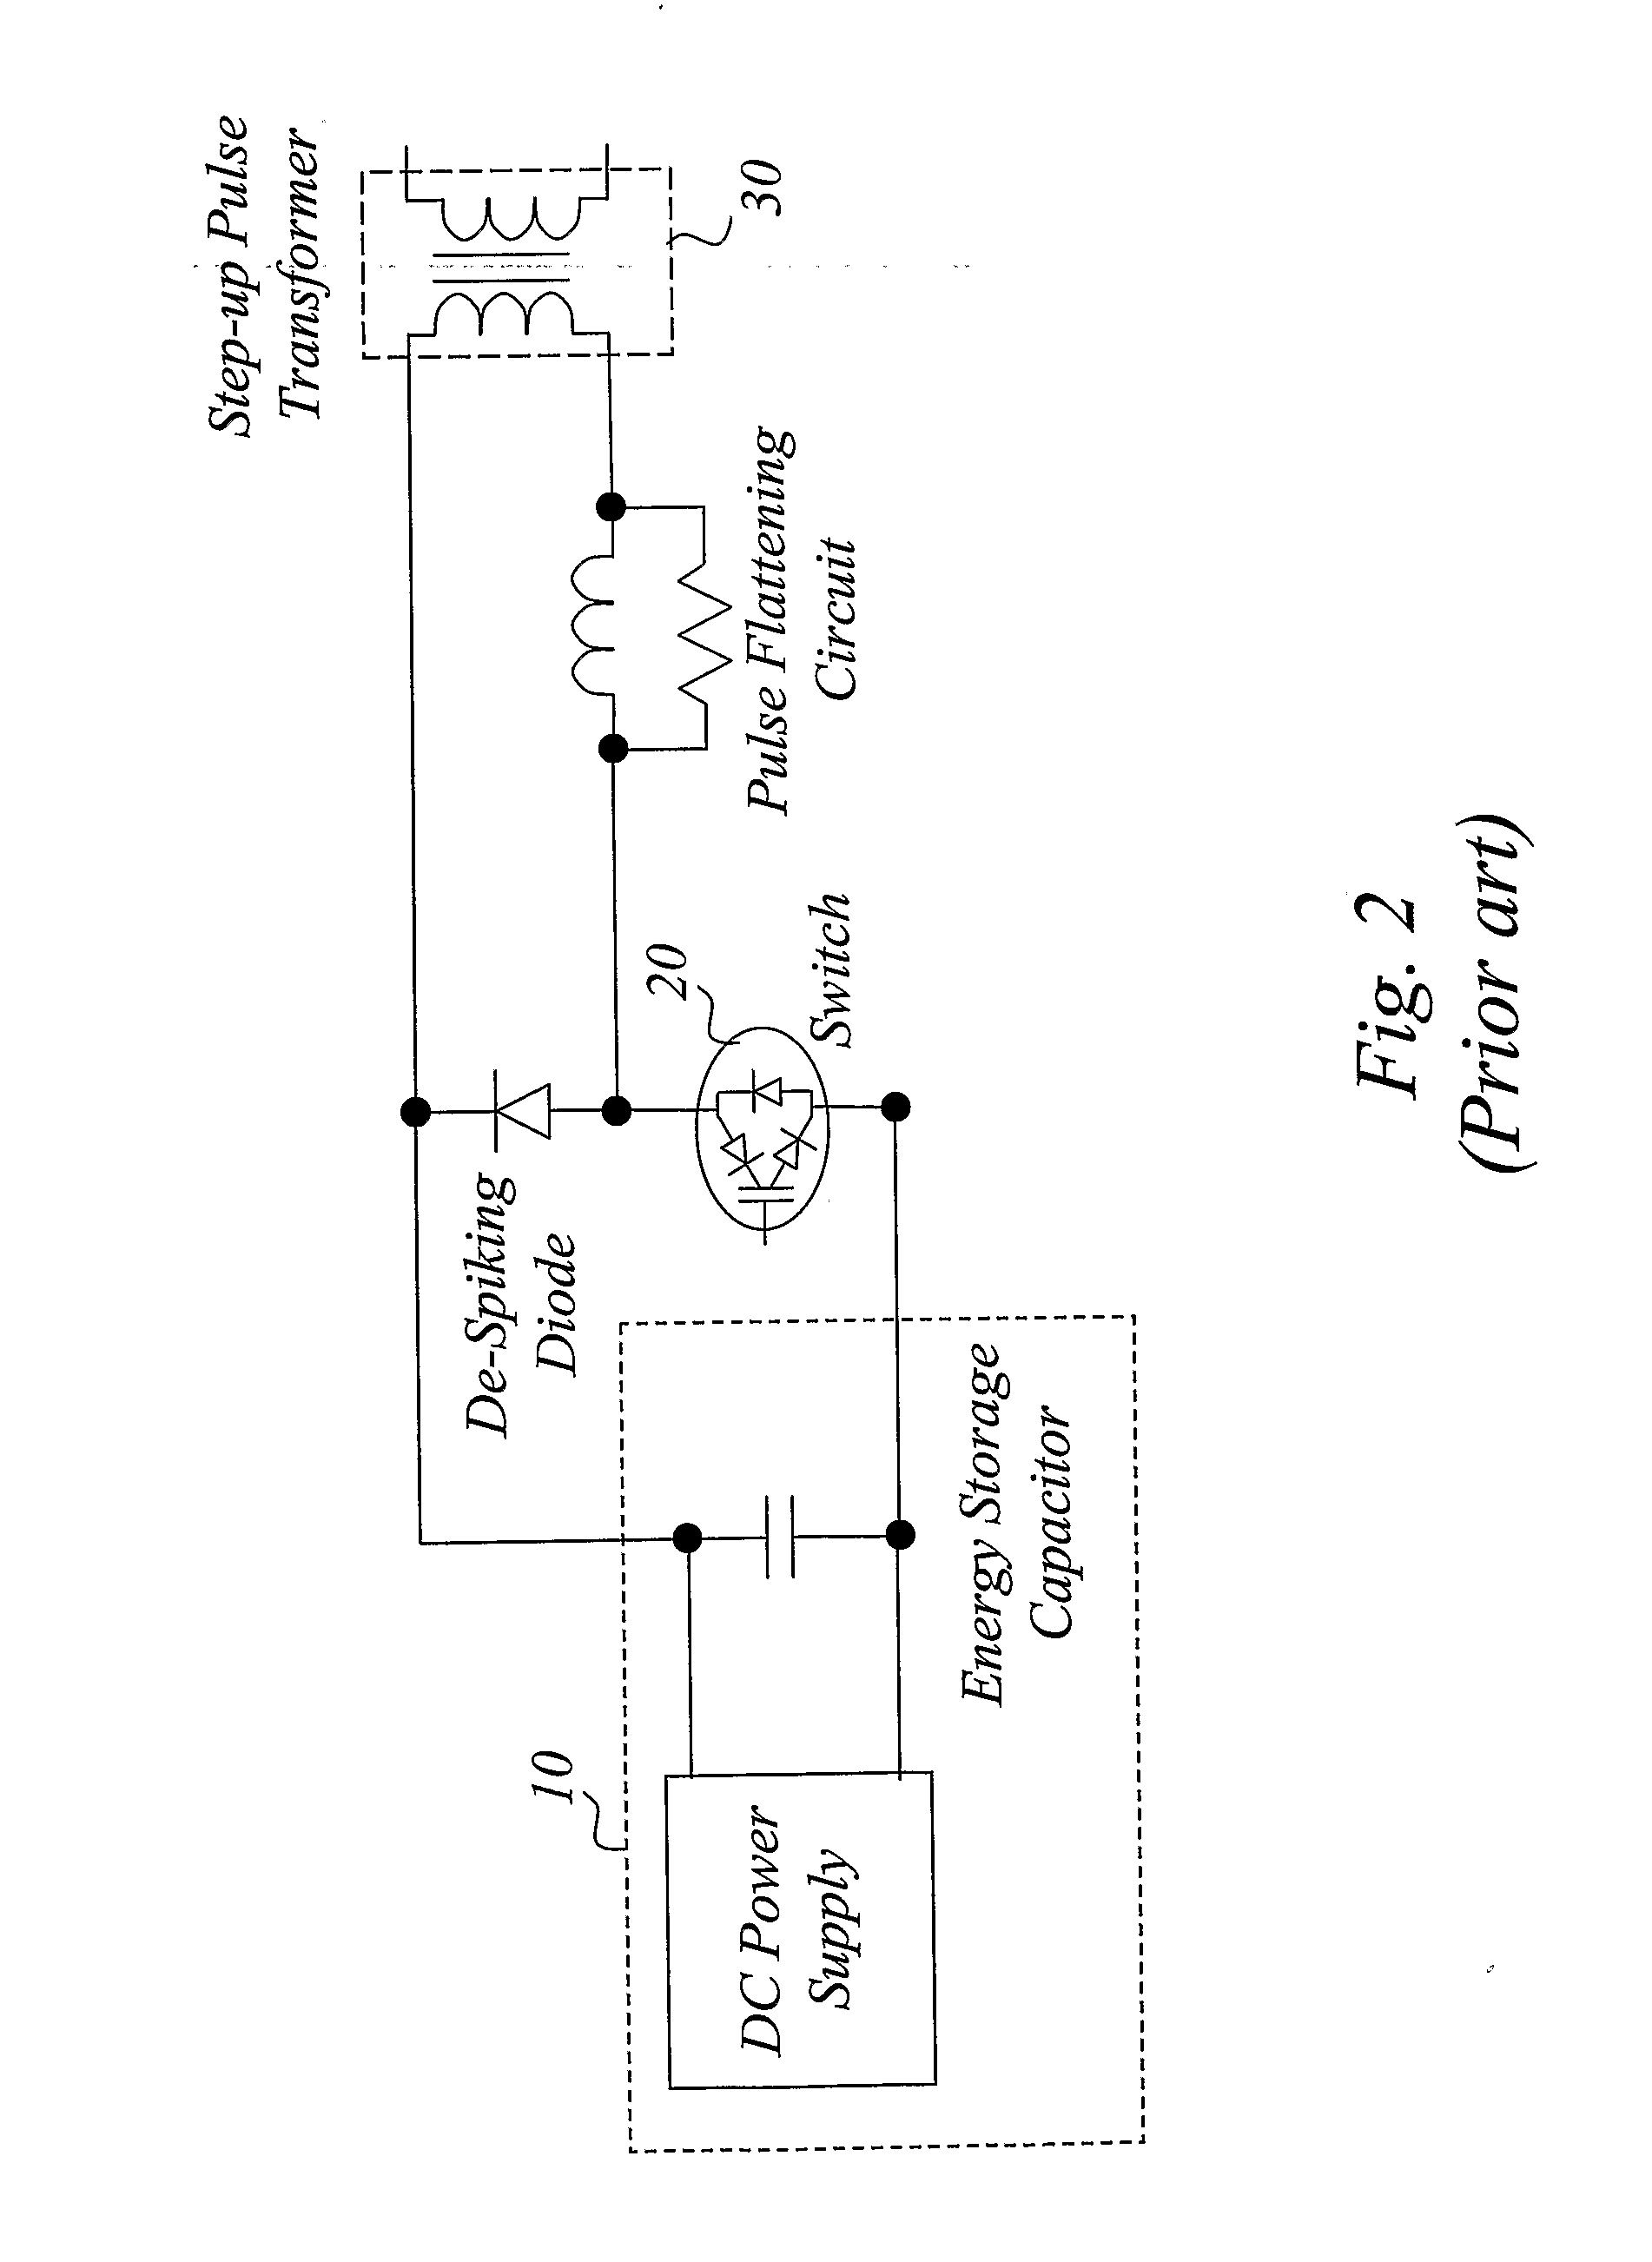 Electrical Power Switching With Efficient Switch Protection